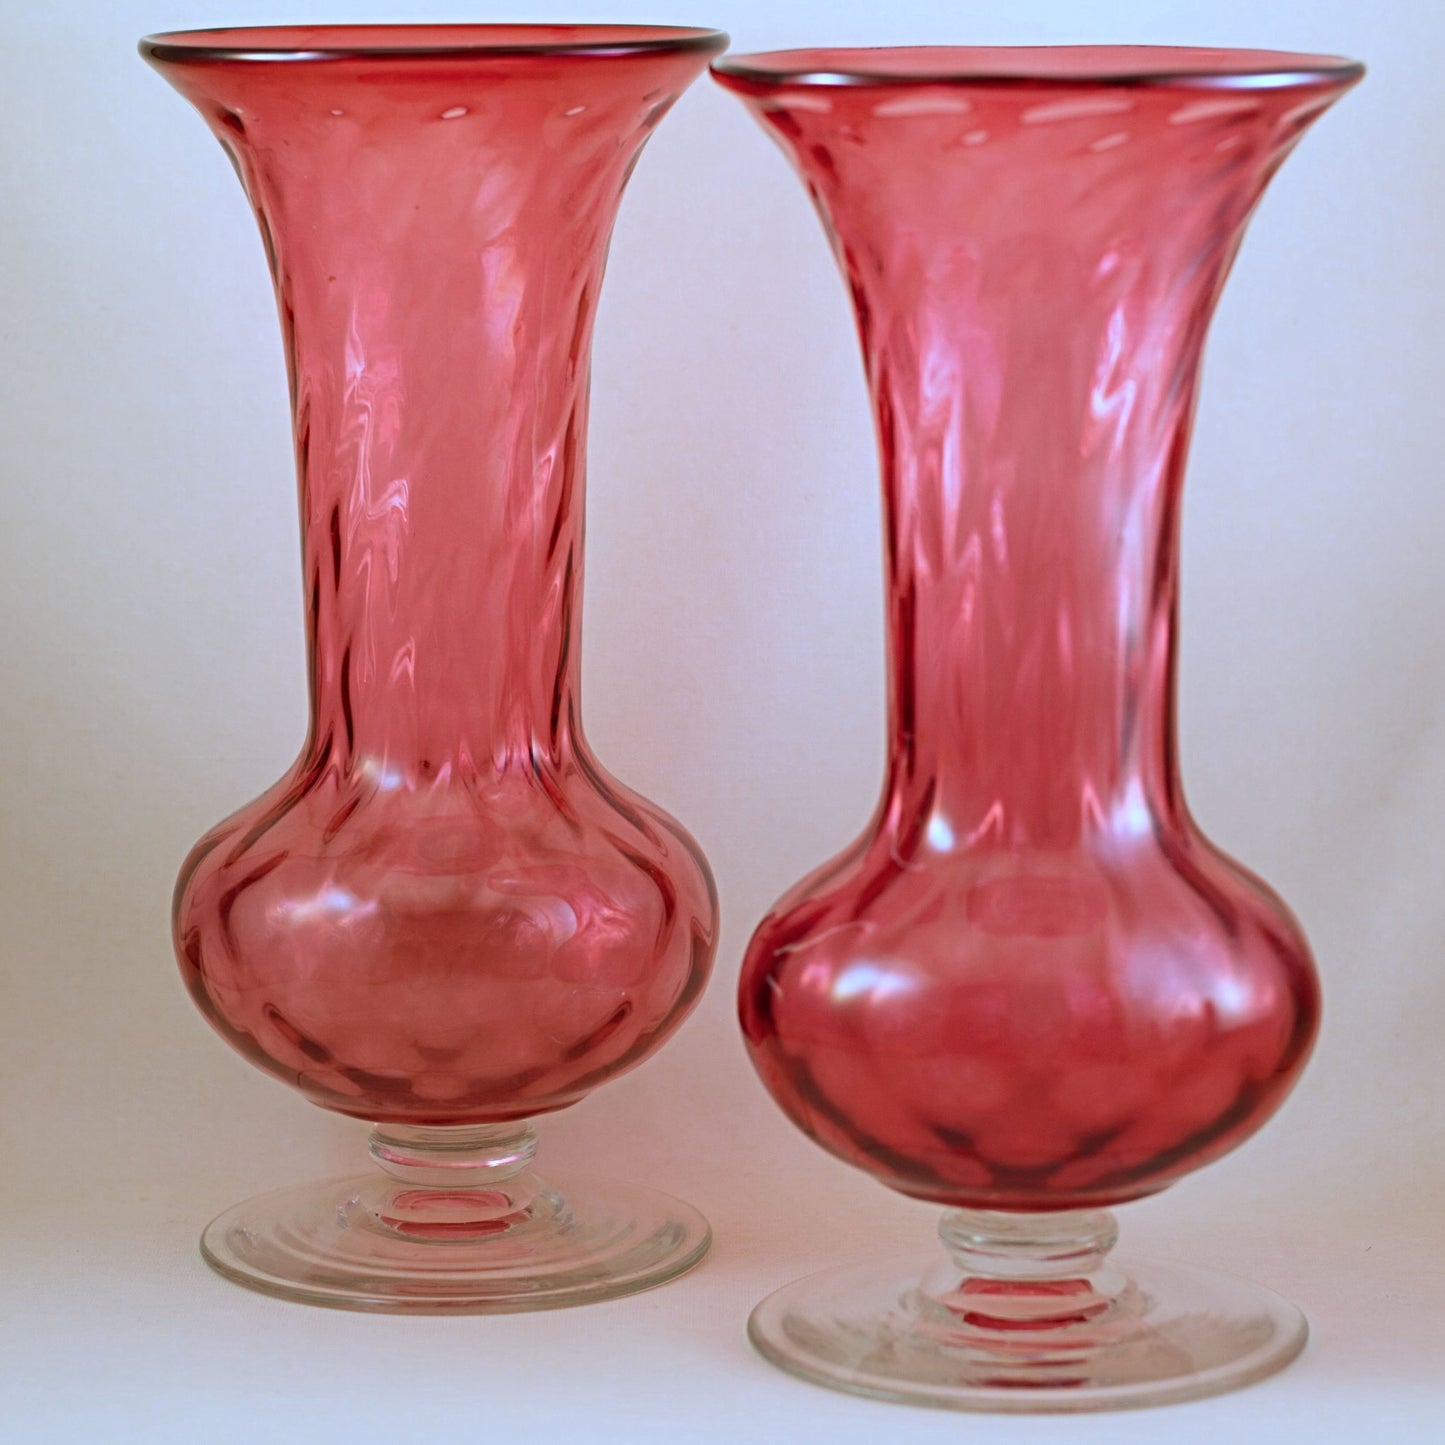 PILGRIM CRANBERRY GLASS Pair of Vintage Footed Vases